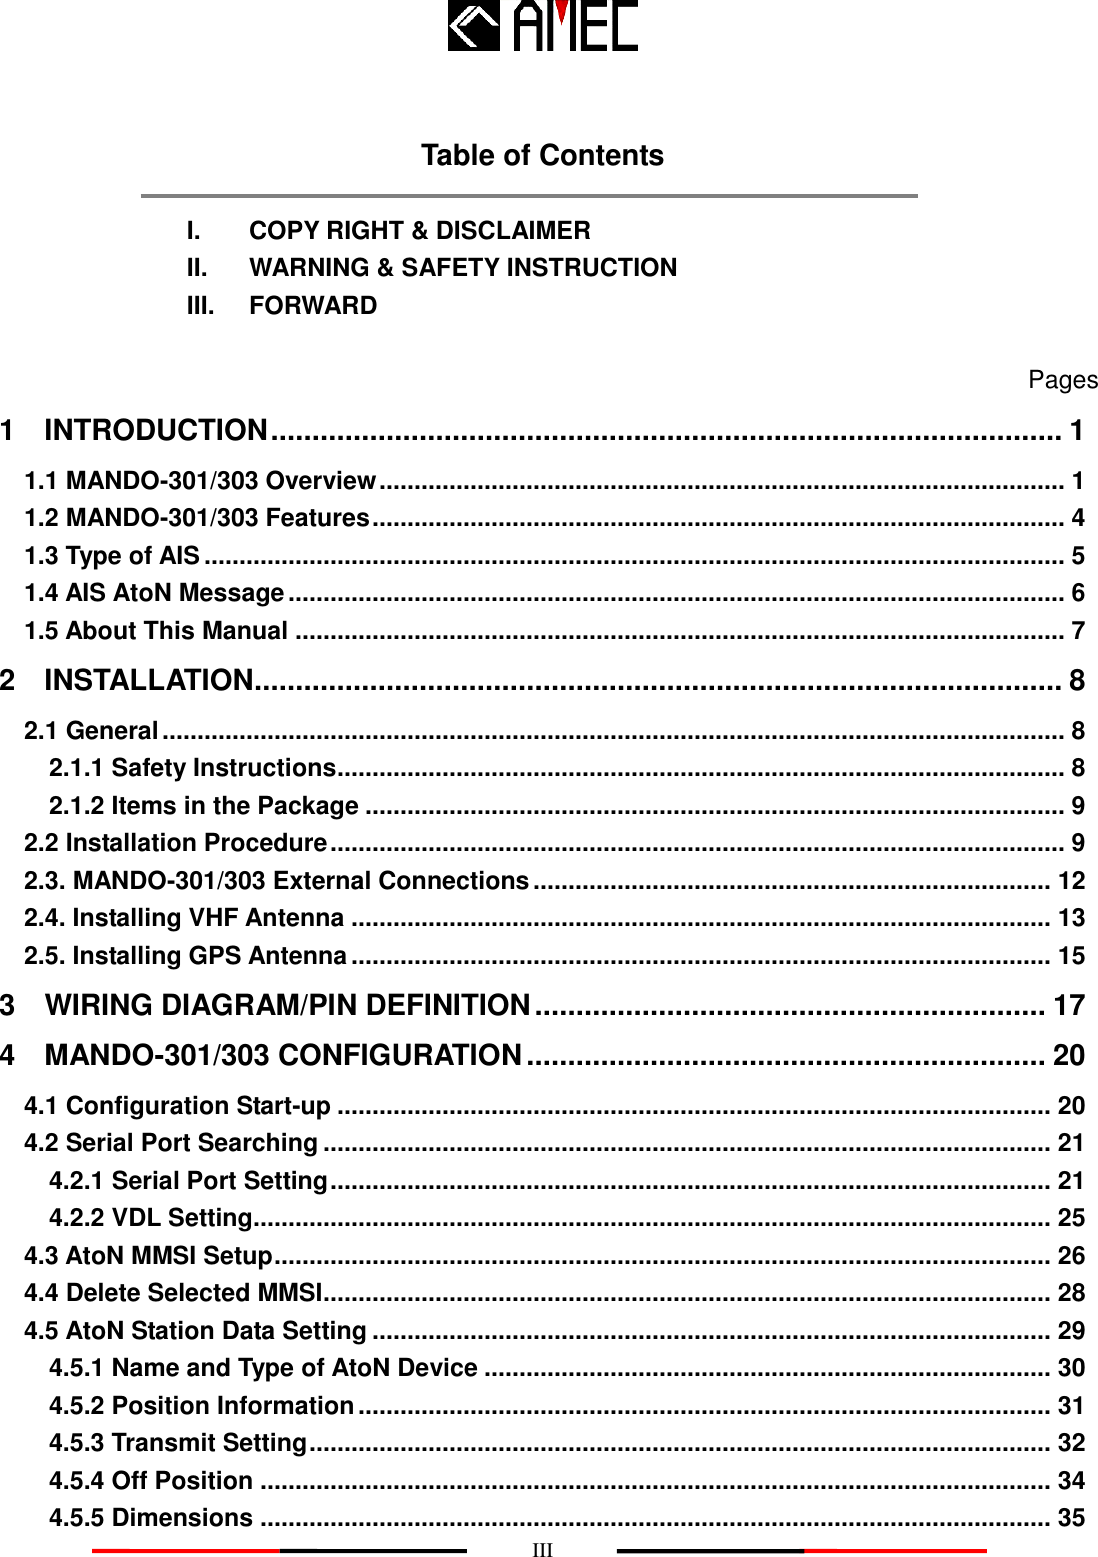    III  Table of Contents  I.    COPY RIGHT &amp; DISCLAIMER   II.    WARNING &amp; SAFETY INSTRUCTION III.    FORWARD    Pages 1    INTRODUCTION ................................................................................................ 1 1.1 MANDO-301/303 Overview .................................................................................................. 1 1.2 MANDO-301/303 Features ................................................................................................... 4 1.3 Type of AIS ........................................................................................................................... 5 1.4 AIS AtoN Message ............................................................................................................... 6 1.5 About This Manual .............................................................................................................. 7 2    INSTALLATION.................................................................................................. 8 2.1 General ................................................................................................................................. 8 2.1.1 Safety Instructions ........................................................................................................ 8 2.1.2 Items in the Package .................................................................................................... 9 2.2 Installation Procedure ......................................................................................................... 9 2.3. MANDO-301/303 External Connections .......................................................................... 12 2.4. Installing VHF Antenna .................................................................................................... 13 2.5. Installing GPS Antenna .................................................................................................... 15 3    WIRING DIAGRAM/PIN DEFINITION .............................................................. 17 4    MANDO-301/303 CONFIGURATION ............................................................... 20 4.1 Configuration Start-up ...................................................................................................... 20 4.2 Serial Port Searching ........................................................................................................ 21 4.2.1 Serial Port Setting ....................................................................................................... 21 4.2.2 VDL Setting .................................................................................................................. 25 4.3 AtoN MMSI Setup ............................................................................................................... 26 4.4 Delete Selected MMSI ........................................................................................................ 28 4.5 AtoN Station Data Setting ................................................................................................. 29 4.5.1 Name and Type of AtoN Device ................................................................................. 30 4.5.2 Position Information ................................................................................................... 31 4.5.3 Transmit Setting .......................................................................................................... 32 4.5.4 Off Position ................................................................................................................. 34 4.5.5 Dimensions ................................................................................................................. 35 